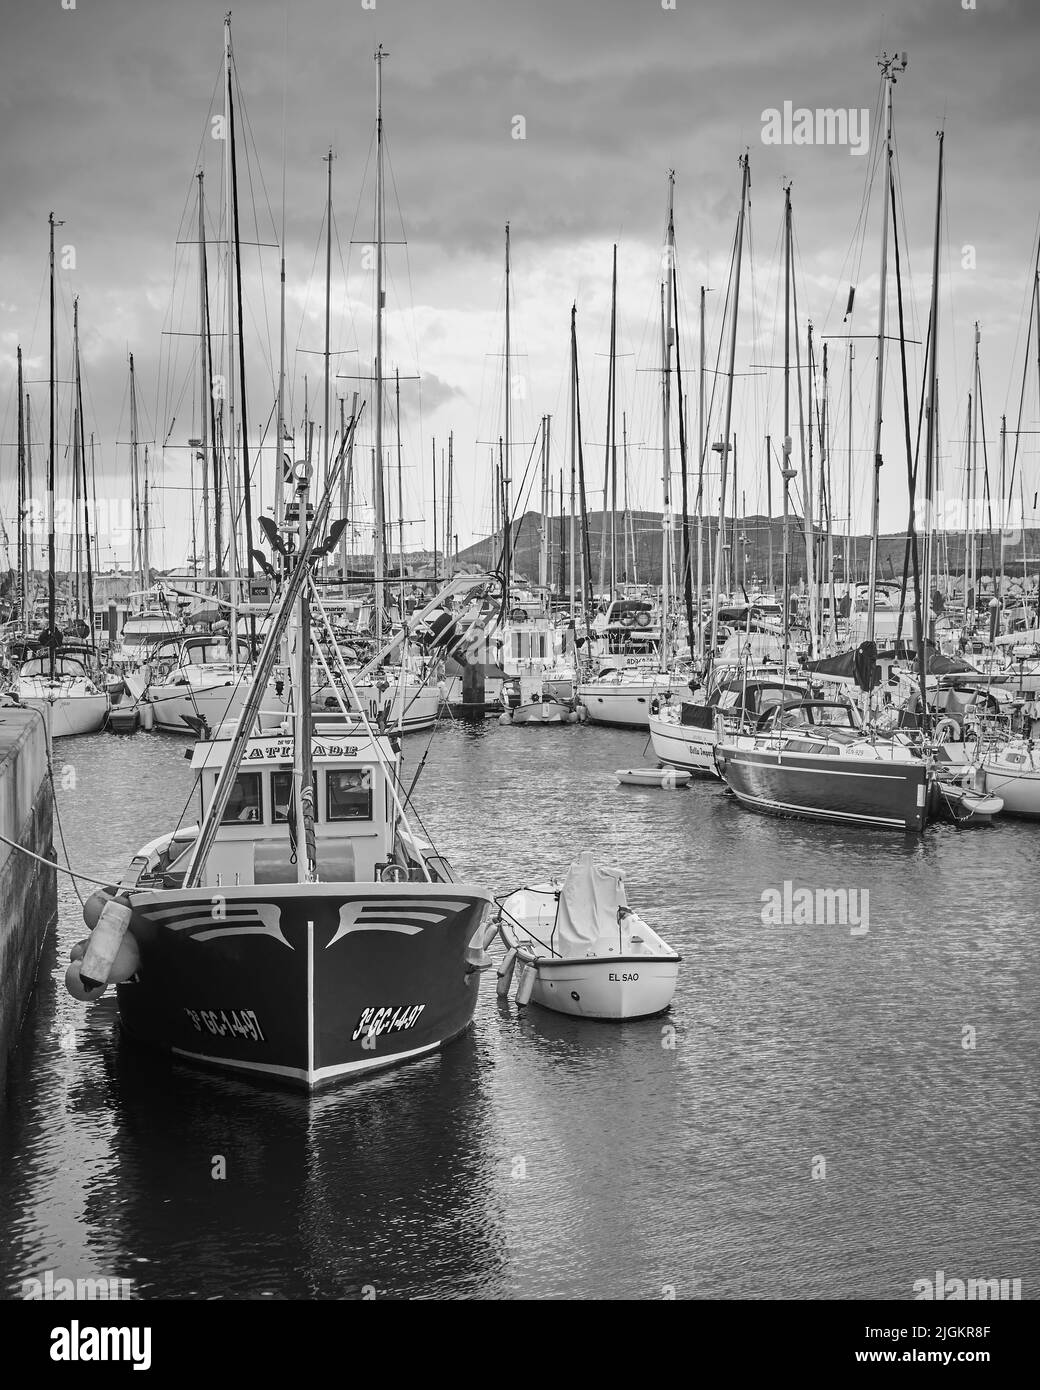 Golf del Sur, Tenerife, Spain - December 7, 2019: Sail yachts and boats at Marina San Miguel. Black and white photography Stock Photo